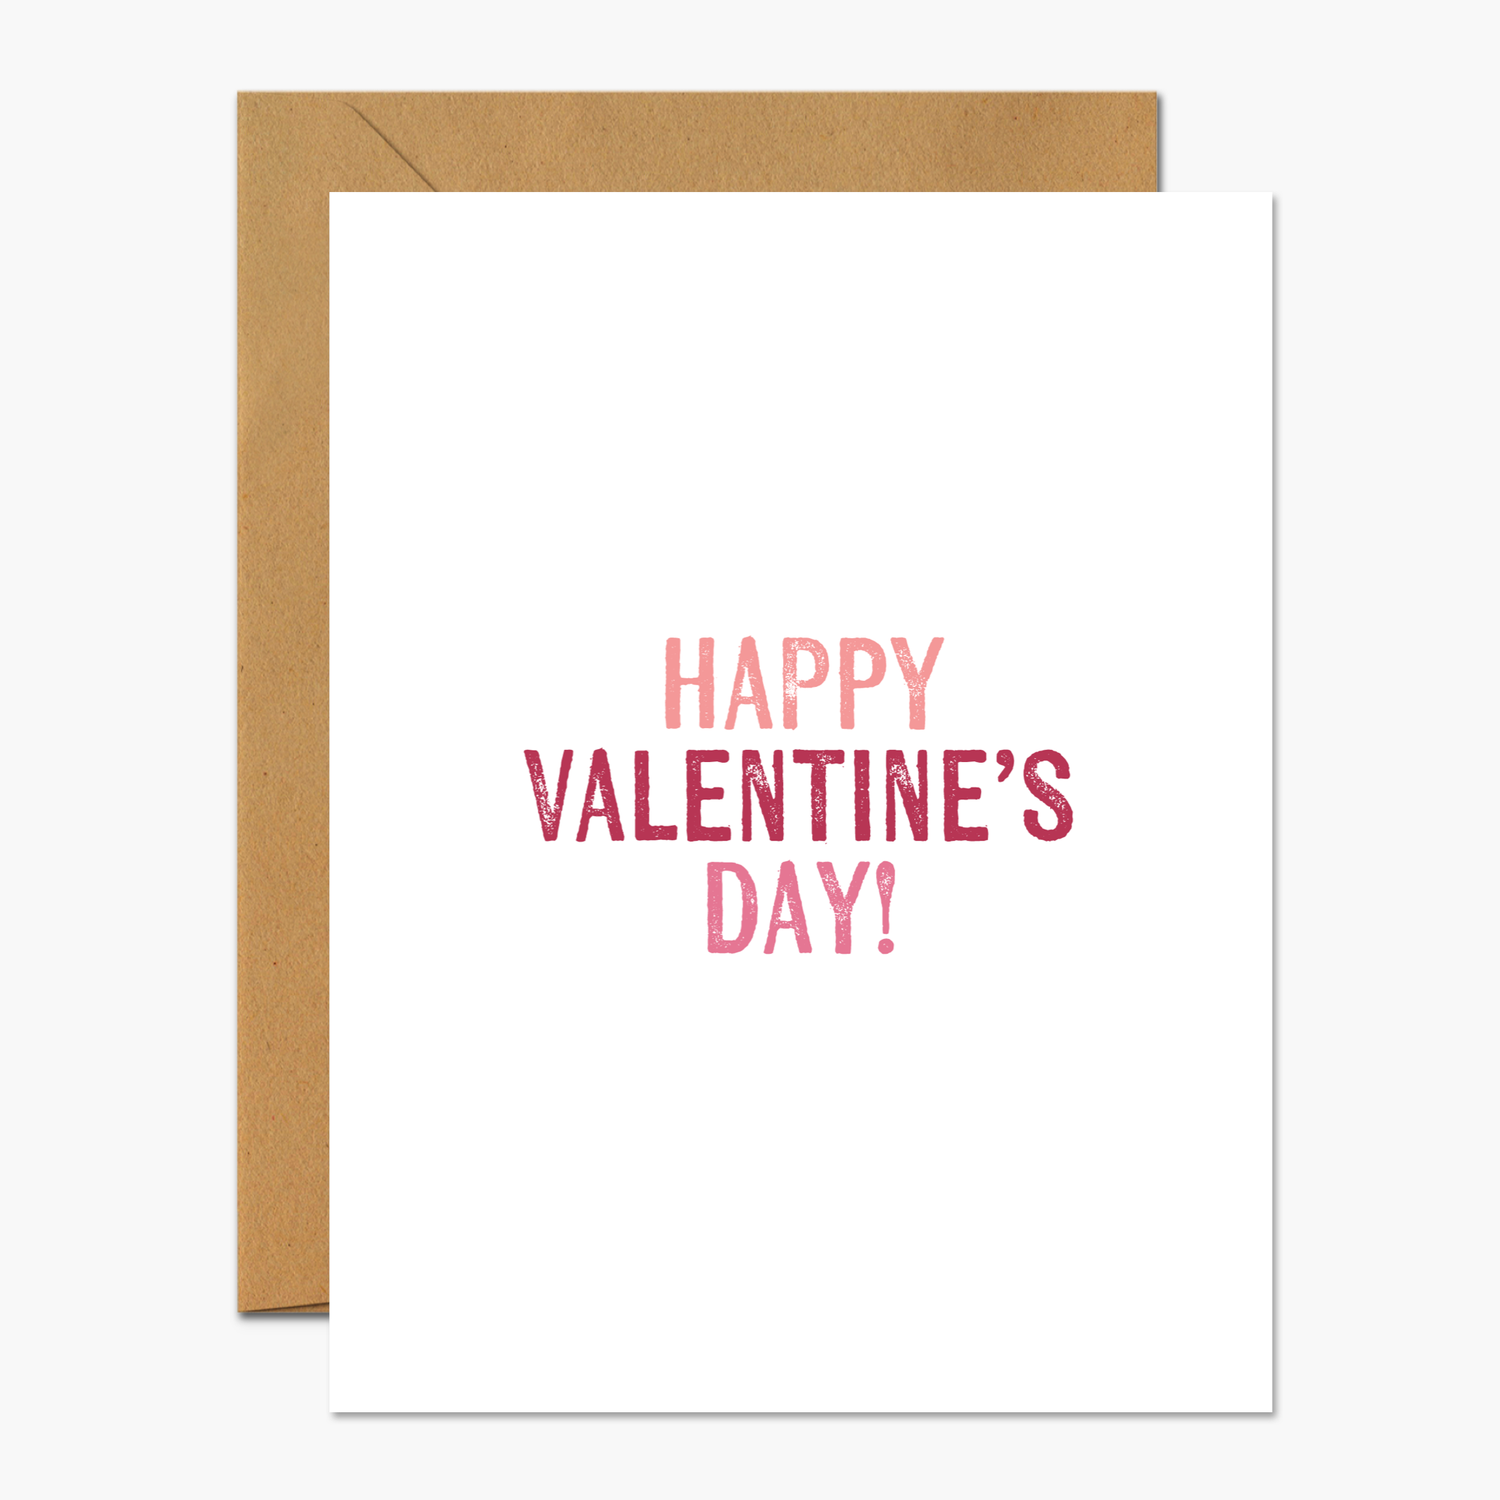 Happy Valentine's Day! Block Print Valentine's Day Greeting Card | Footnotes Paper